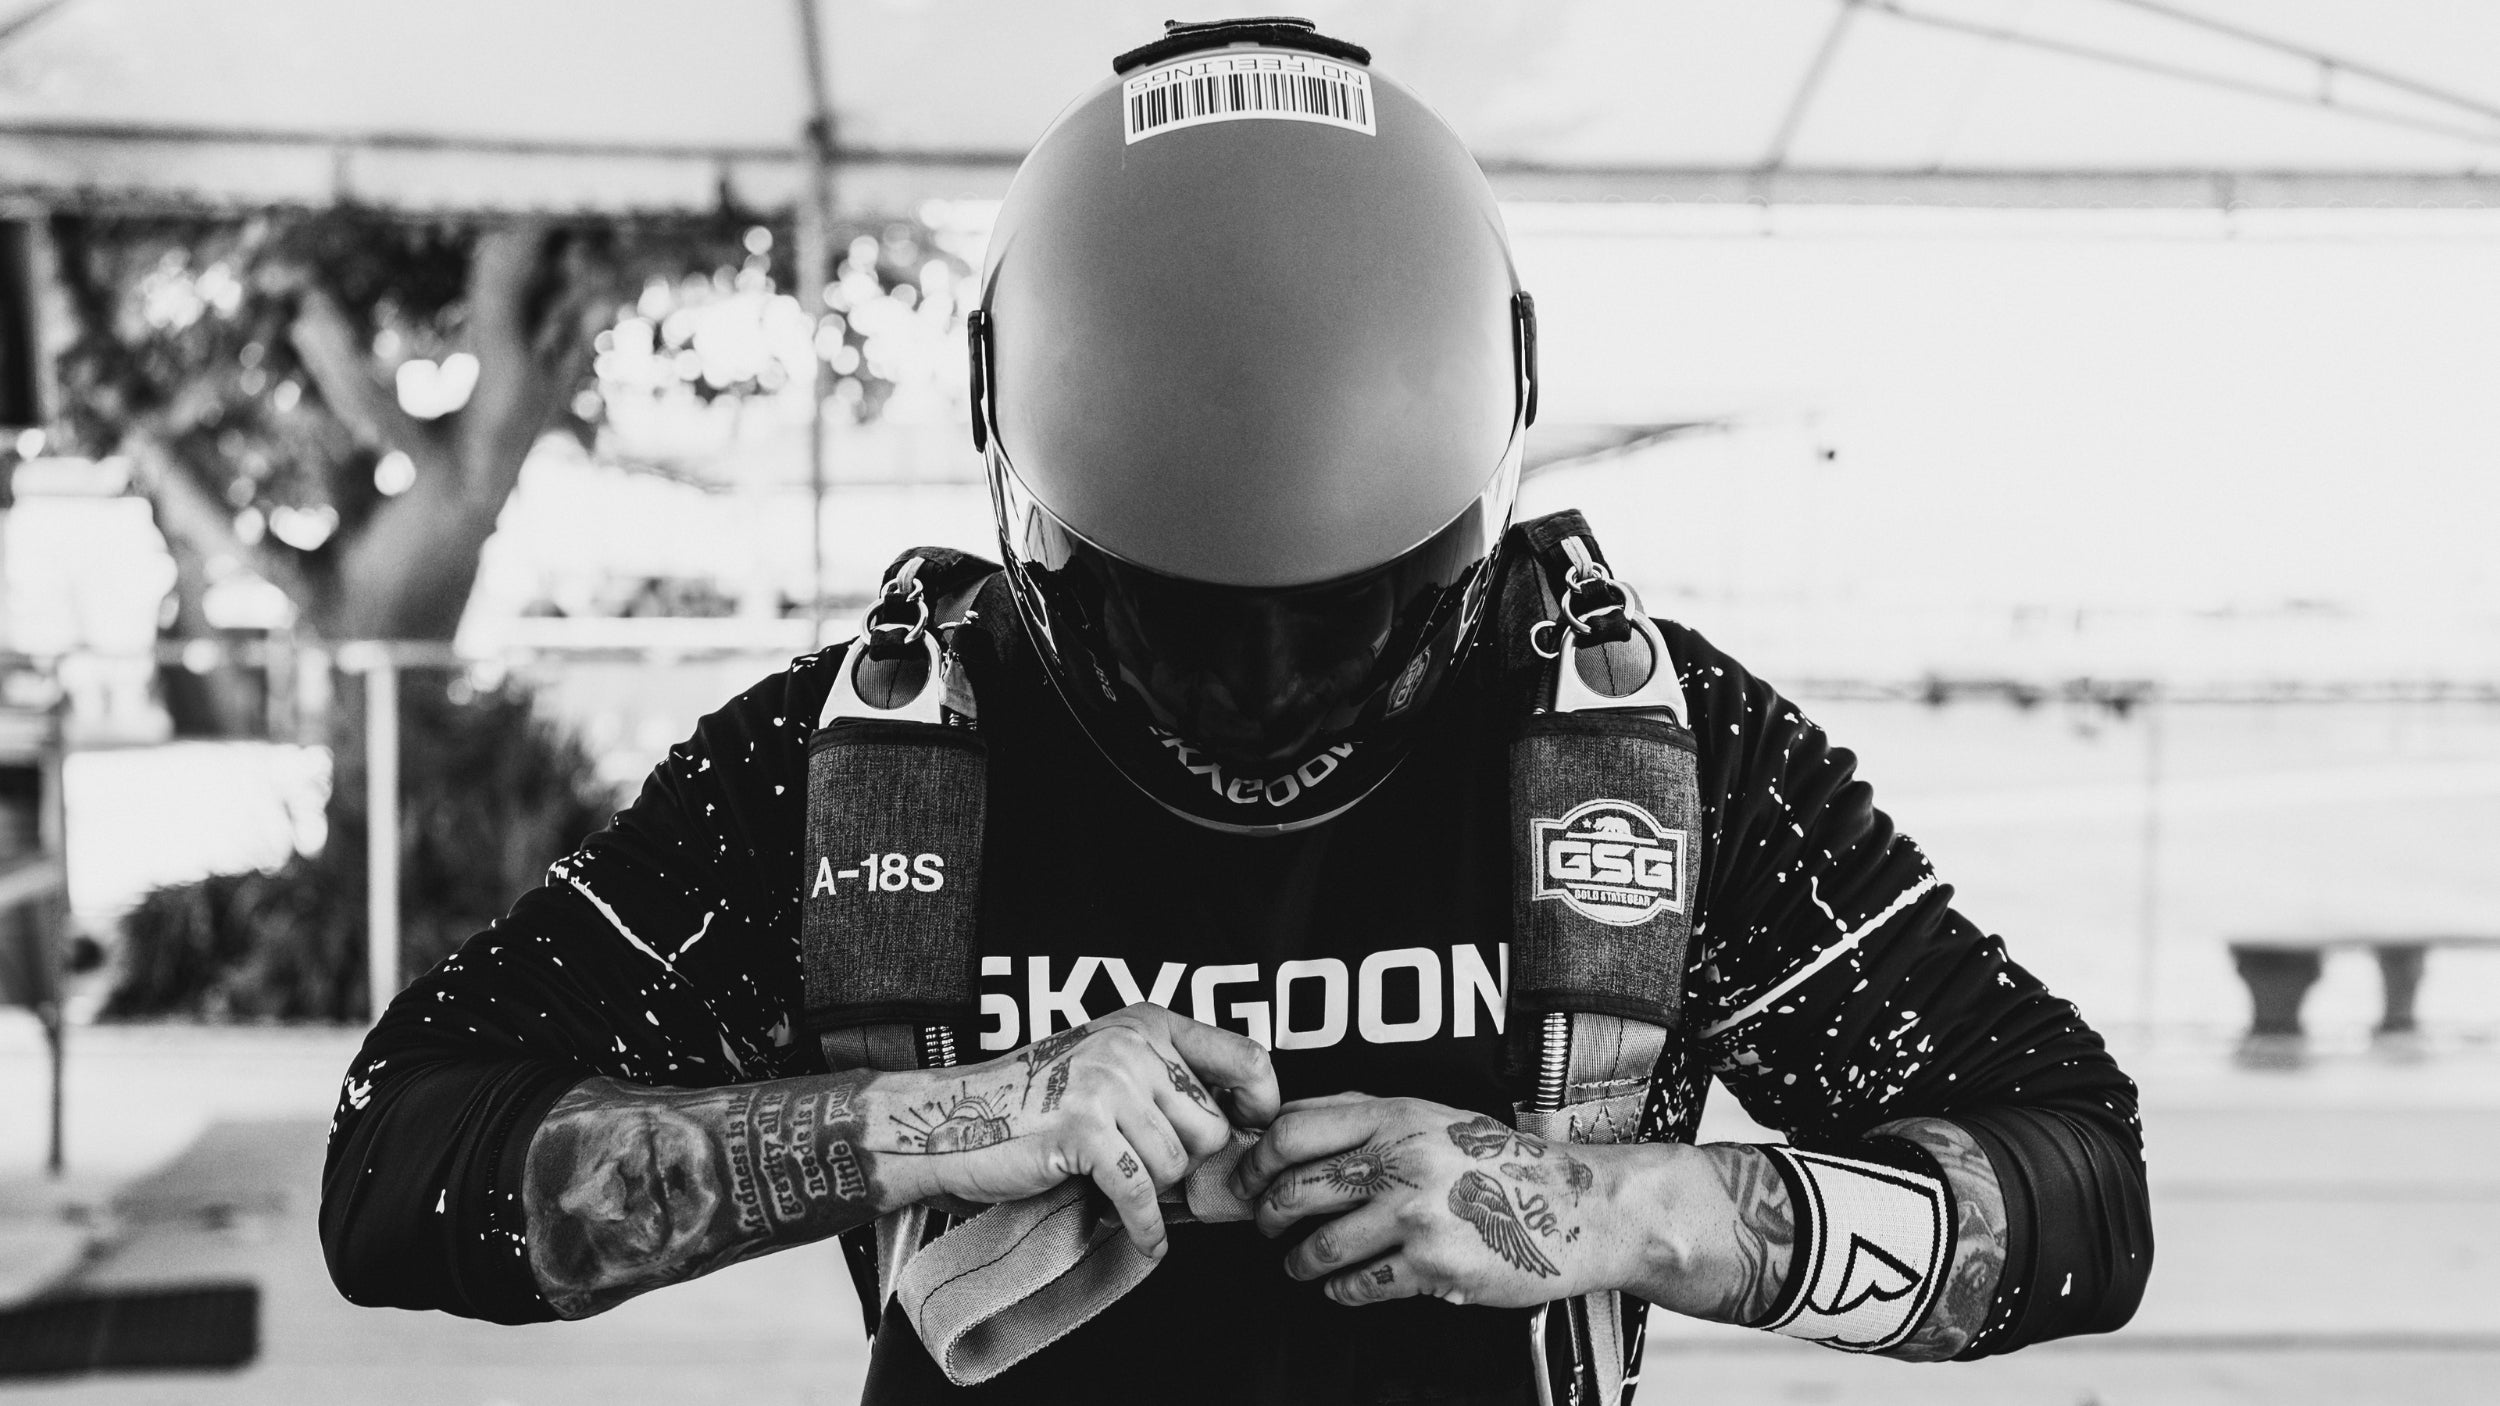 A skydiver checks their gear, focusing on a wrist-mounted device, wearing a full-face helmet and a jumpsuit with visible tattoos on their arms. The image is in black and white.